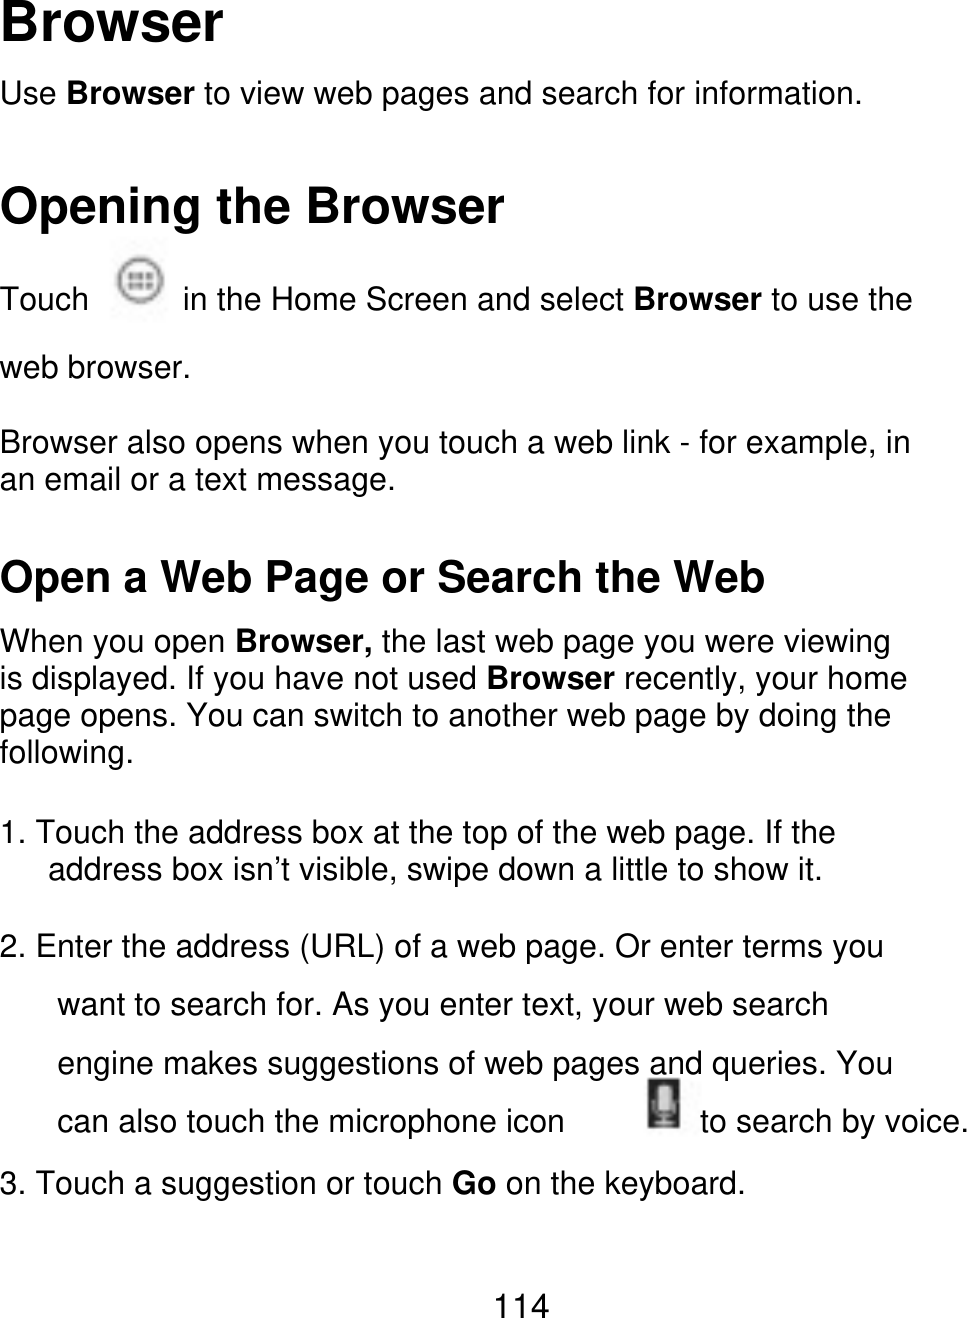 Browser Use Browser to view web pages and search for information. Opening the Browser Touch in the Home Screen and select Browser to use the web browser. Browser also opens when you touch a web link - for example, in an email or a text message. Open a Web Page or Search the Web When you open Browser, the last web page you were viewing is displayed. If you have not used Browser recently, your home page opens. You can switch to another web page by doing the following. 1. Touch the address box at the top of the web page. If the       address box isn’t visible, swipe down a little to show it. 2. Enter the address (URL) of a web page. Or enter terms you want to search for. As you enter text, your web search engine makes suggestions of web pages and queries. You can also touch the microphone icon to search by voice. 3. Touch a suggestion or touch Go on the keyboard. 114 